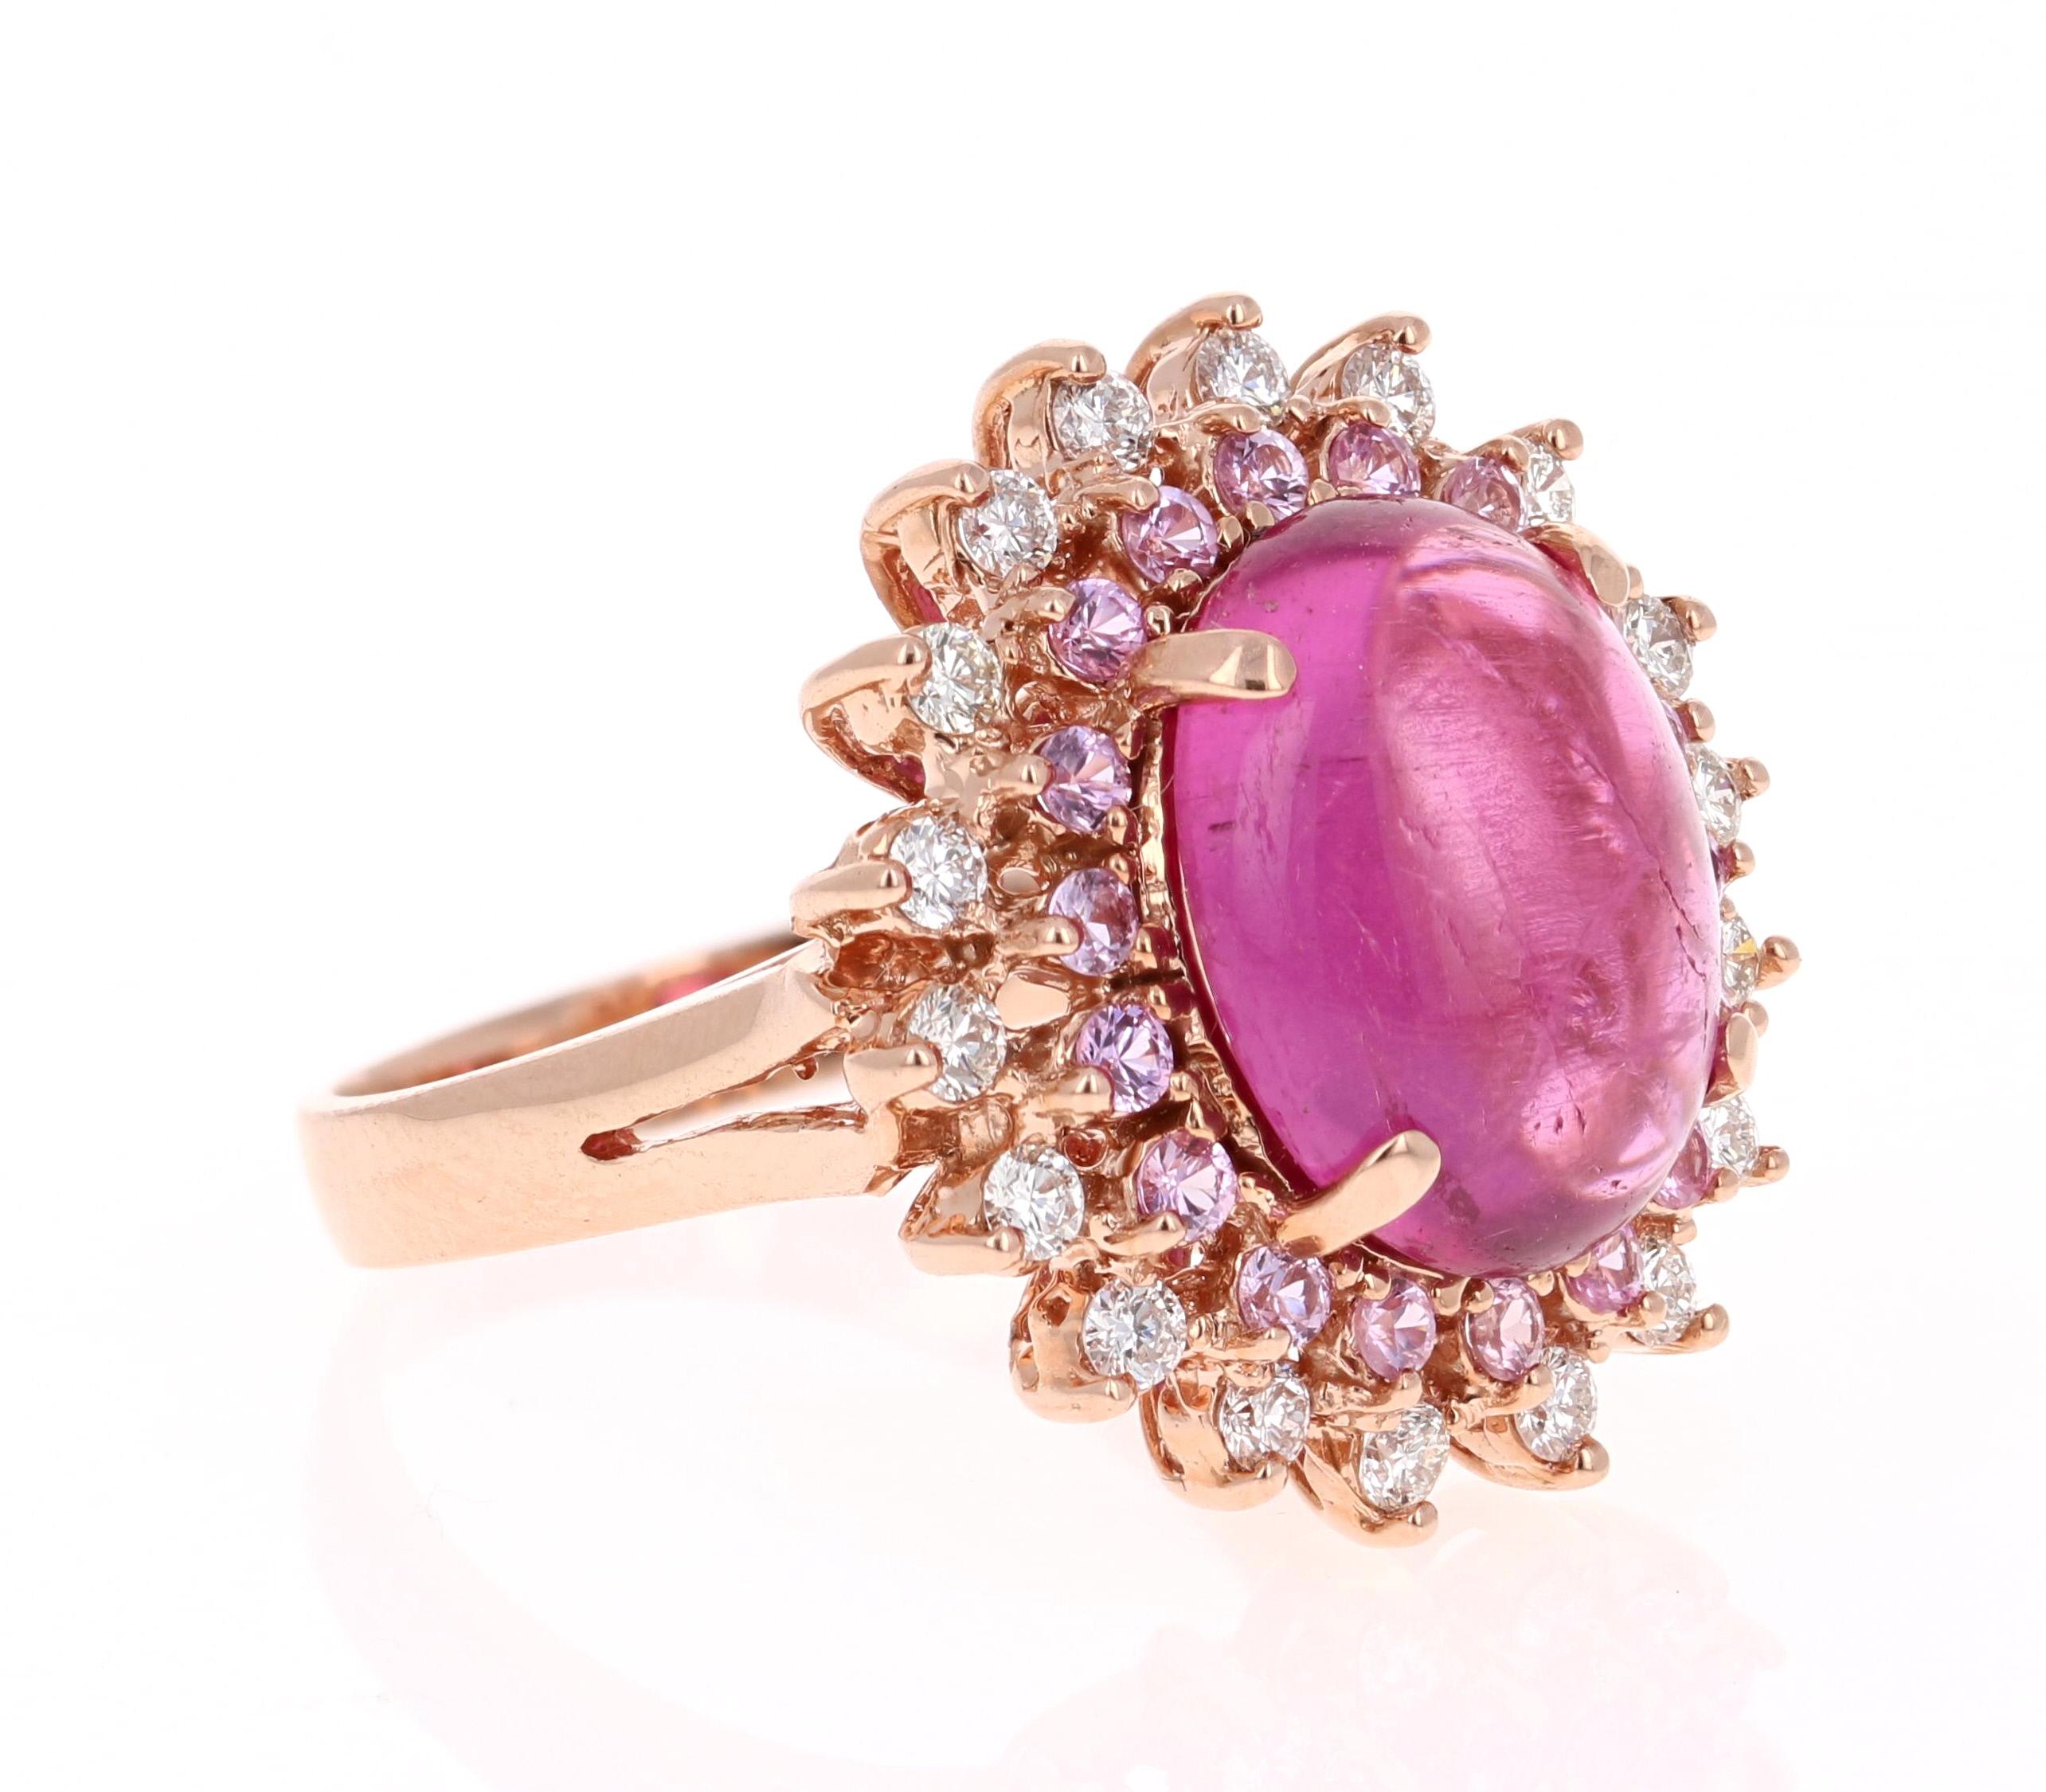 A Stunner!! The most elegant and unique ring to add to your collection! 

This beauty has a large Cabochon Oval Cut Pink Tourmaline that weighs 6.36 Carats. It is adorned with 18 Pink Sapphires that weigh 0.54 Carats and further embellished with 18